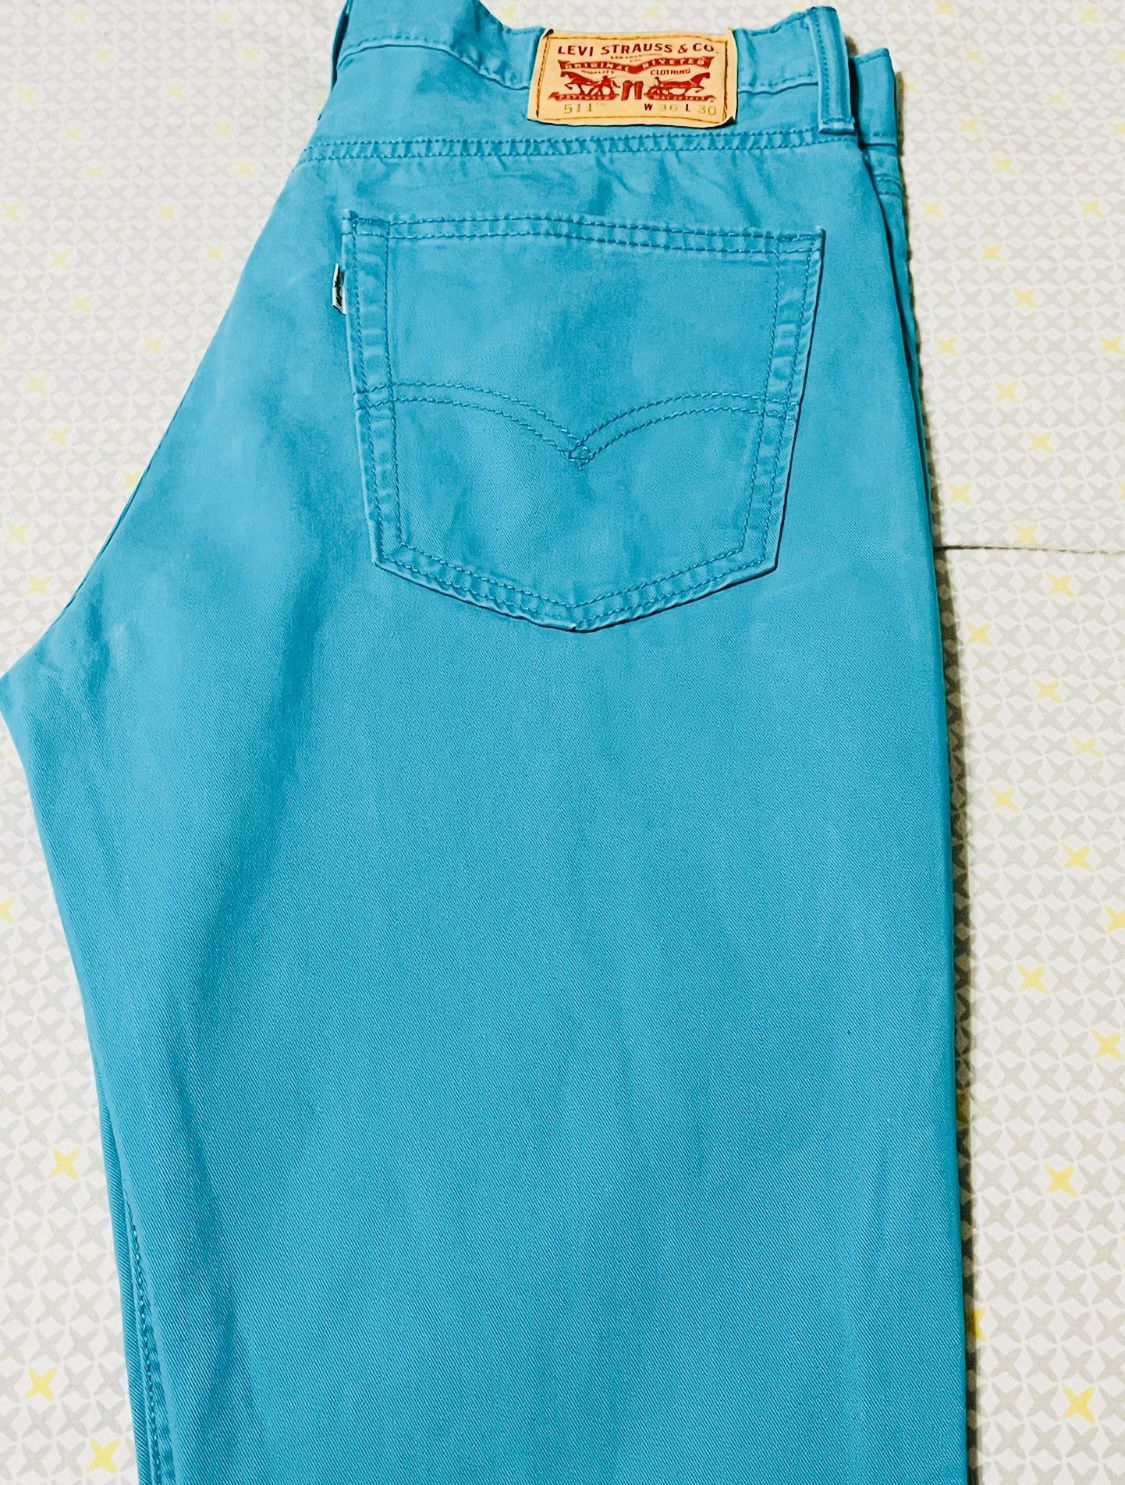 Teal Levi 511’s Size 36-30